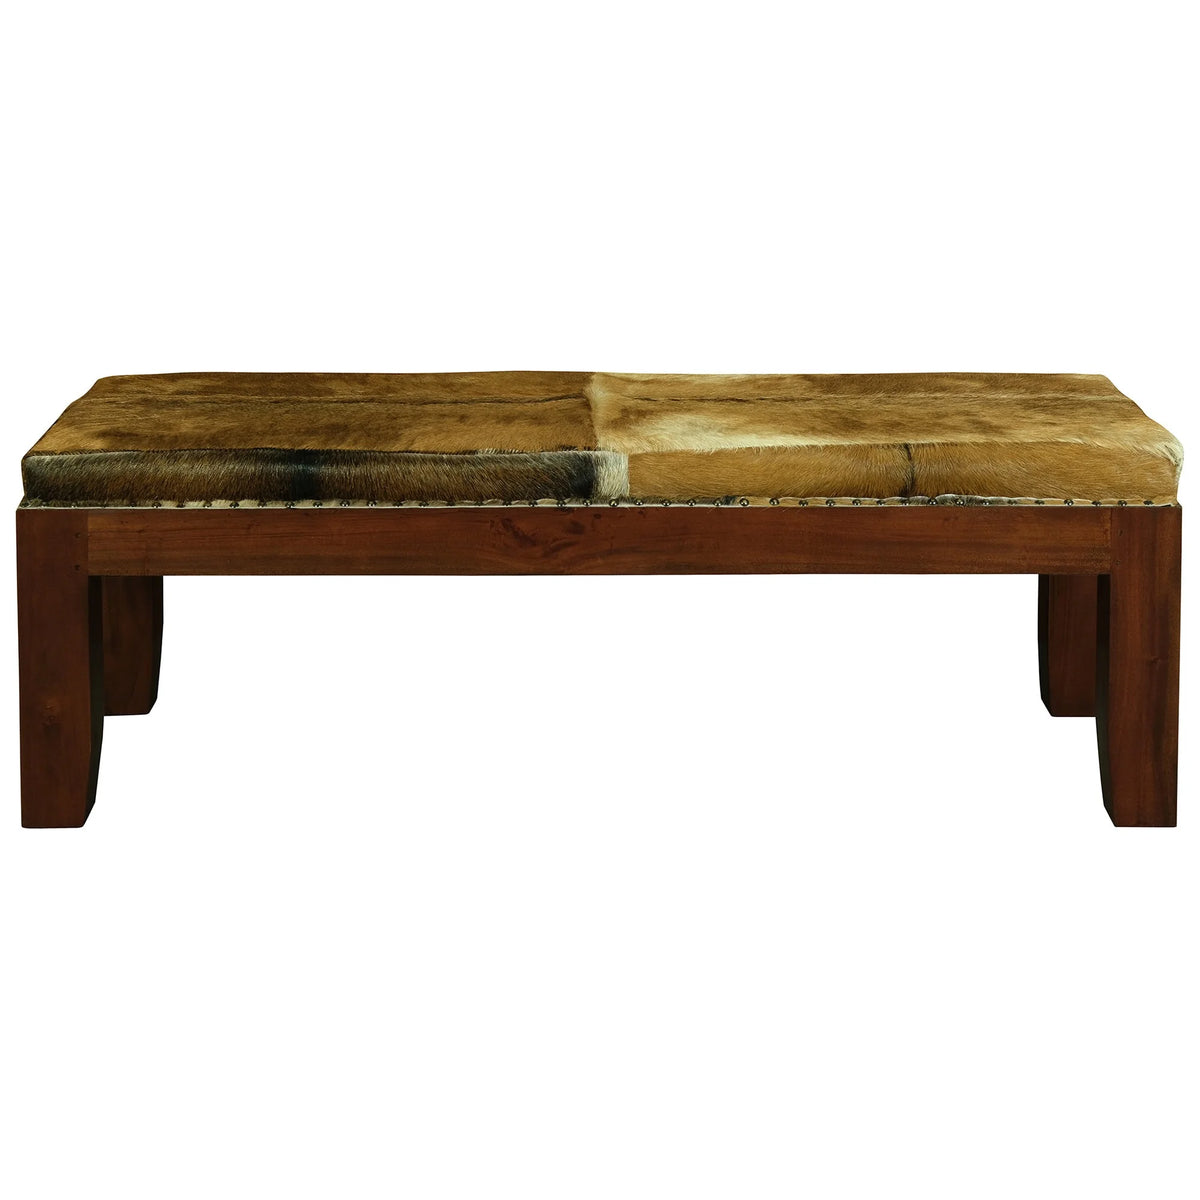 Zocca Solid Timber Double Bench with Goat Hide Seat - Notbrand